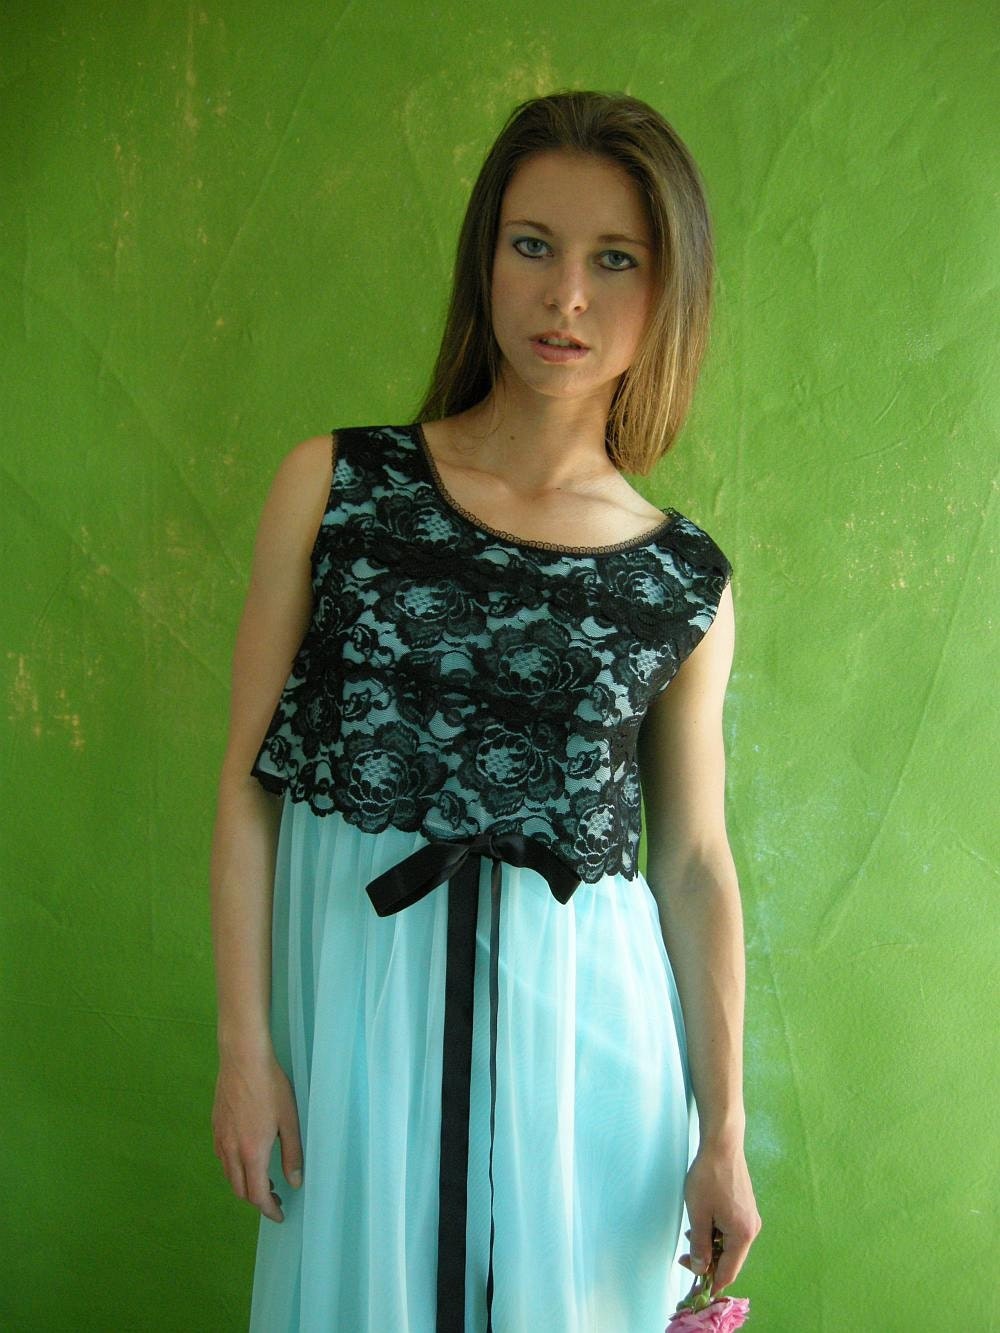 ICE Blue Chiffon Black Lace Vintage 60s Nightgown S by empressjade 